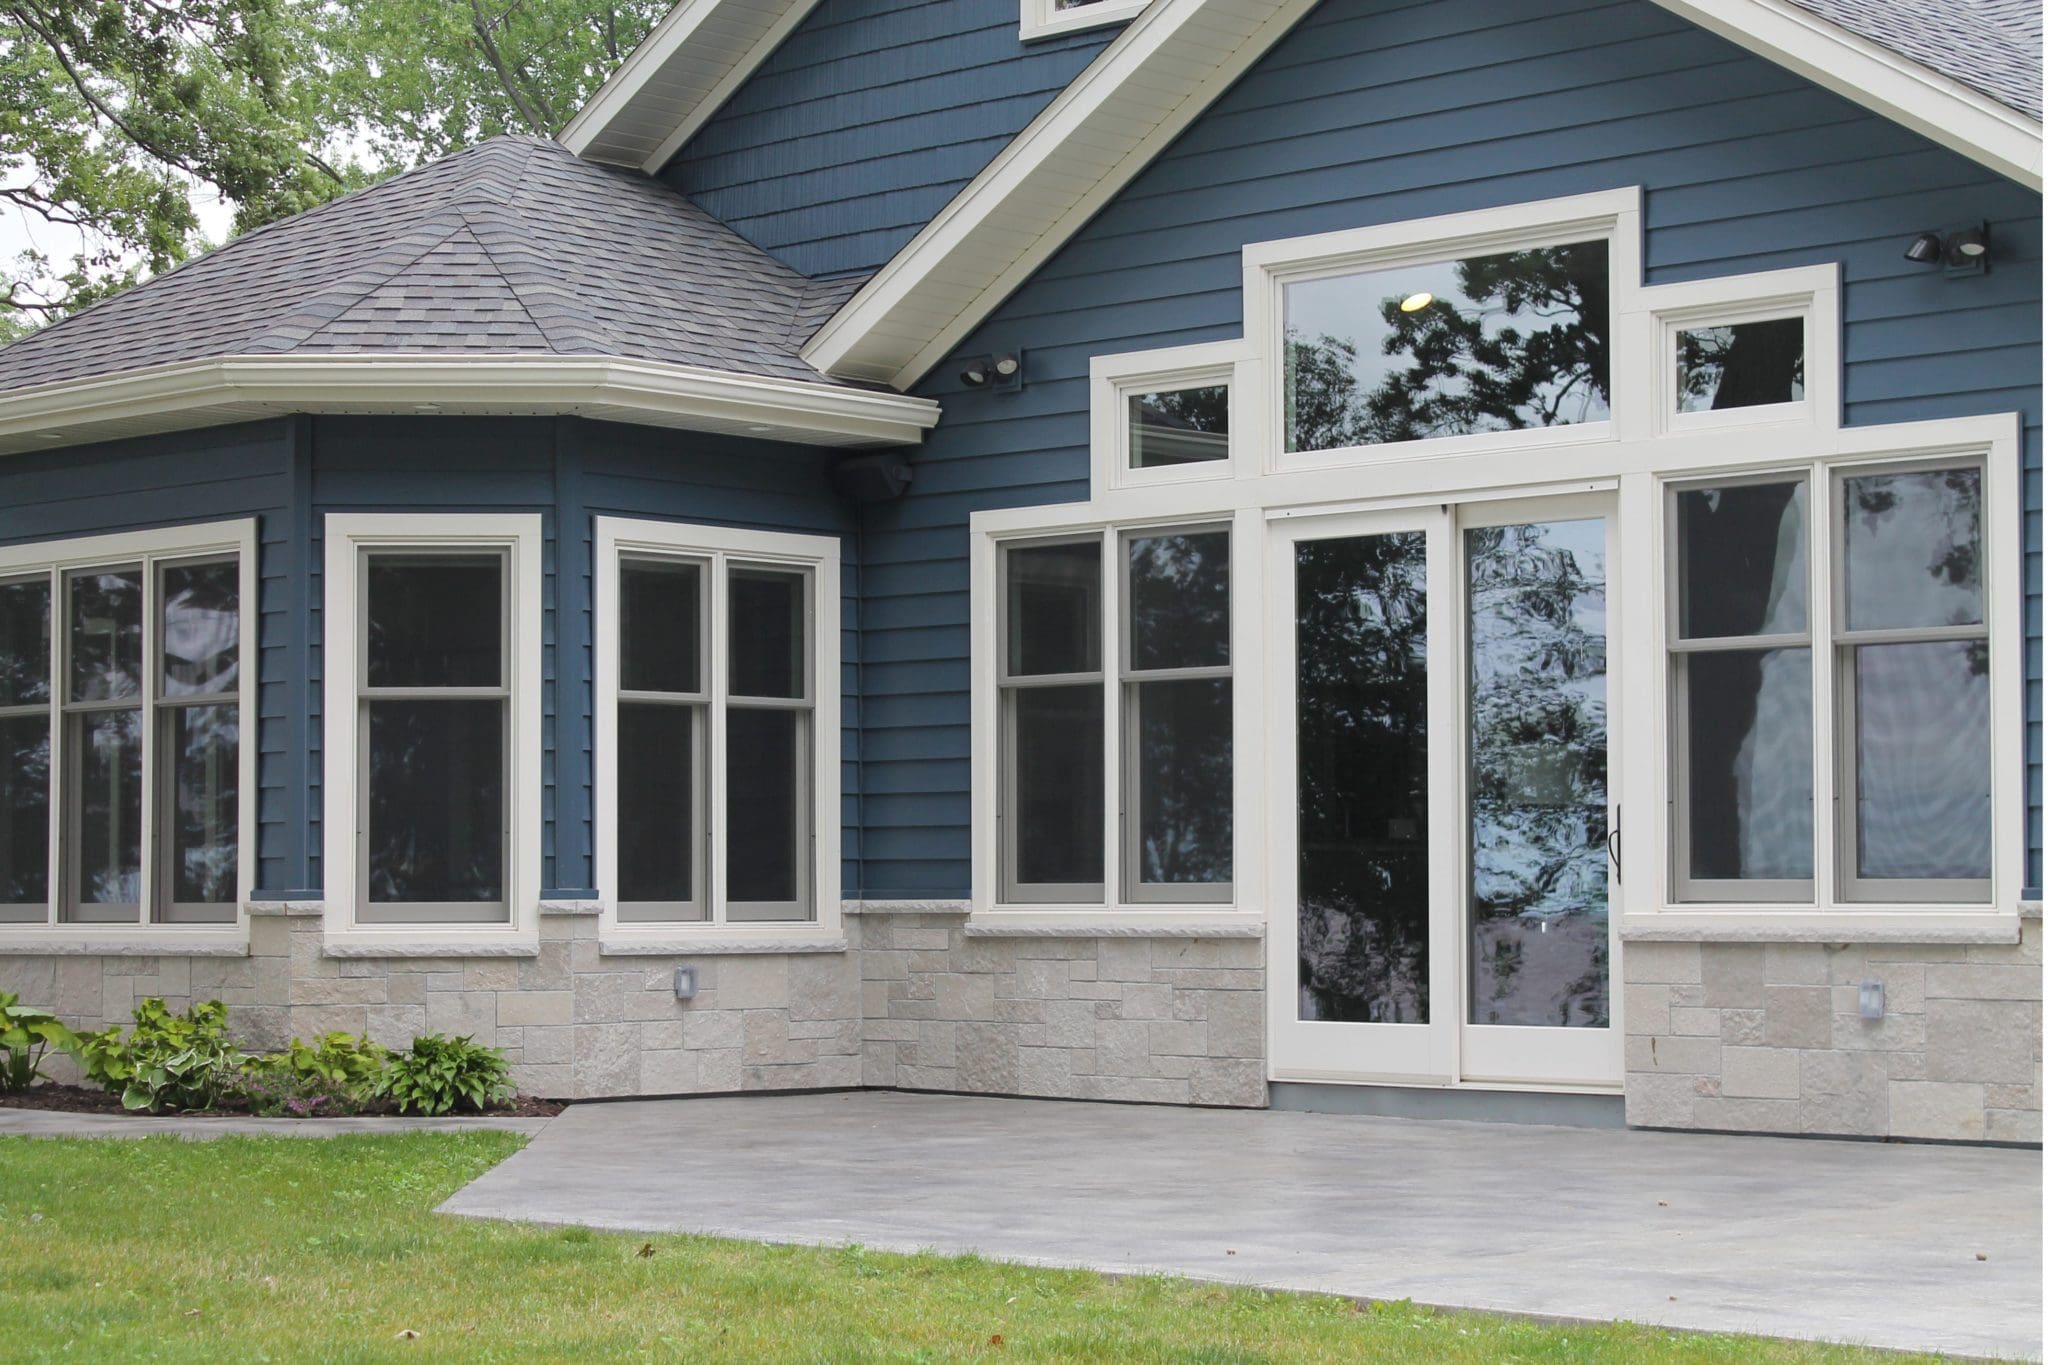 Exterior wainscoting with Fond du Lac natural stone veneer